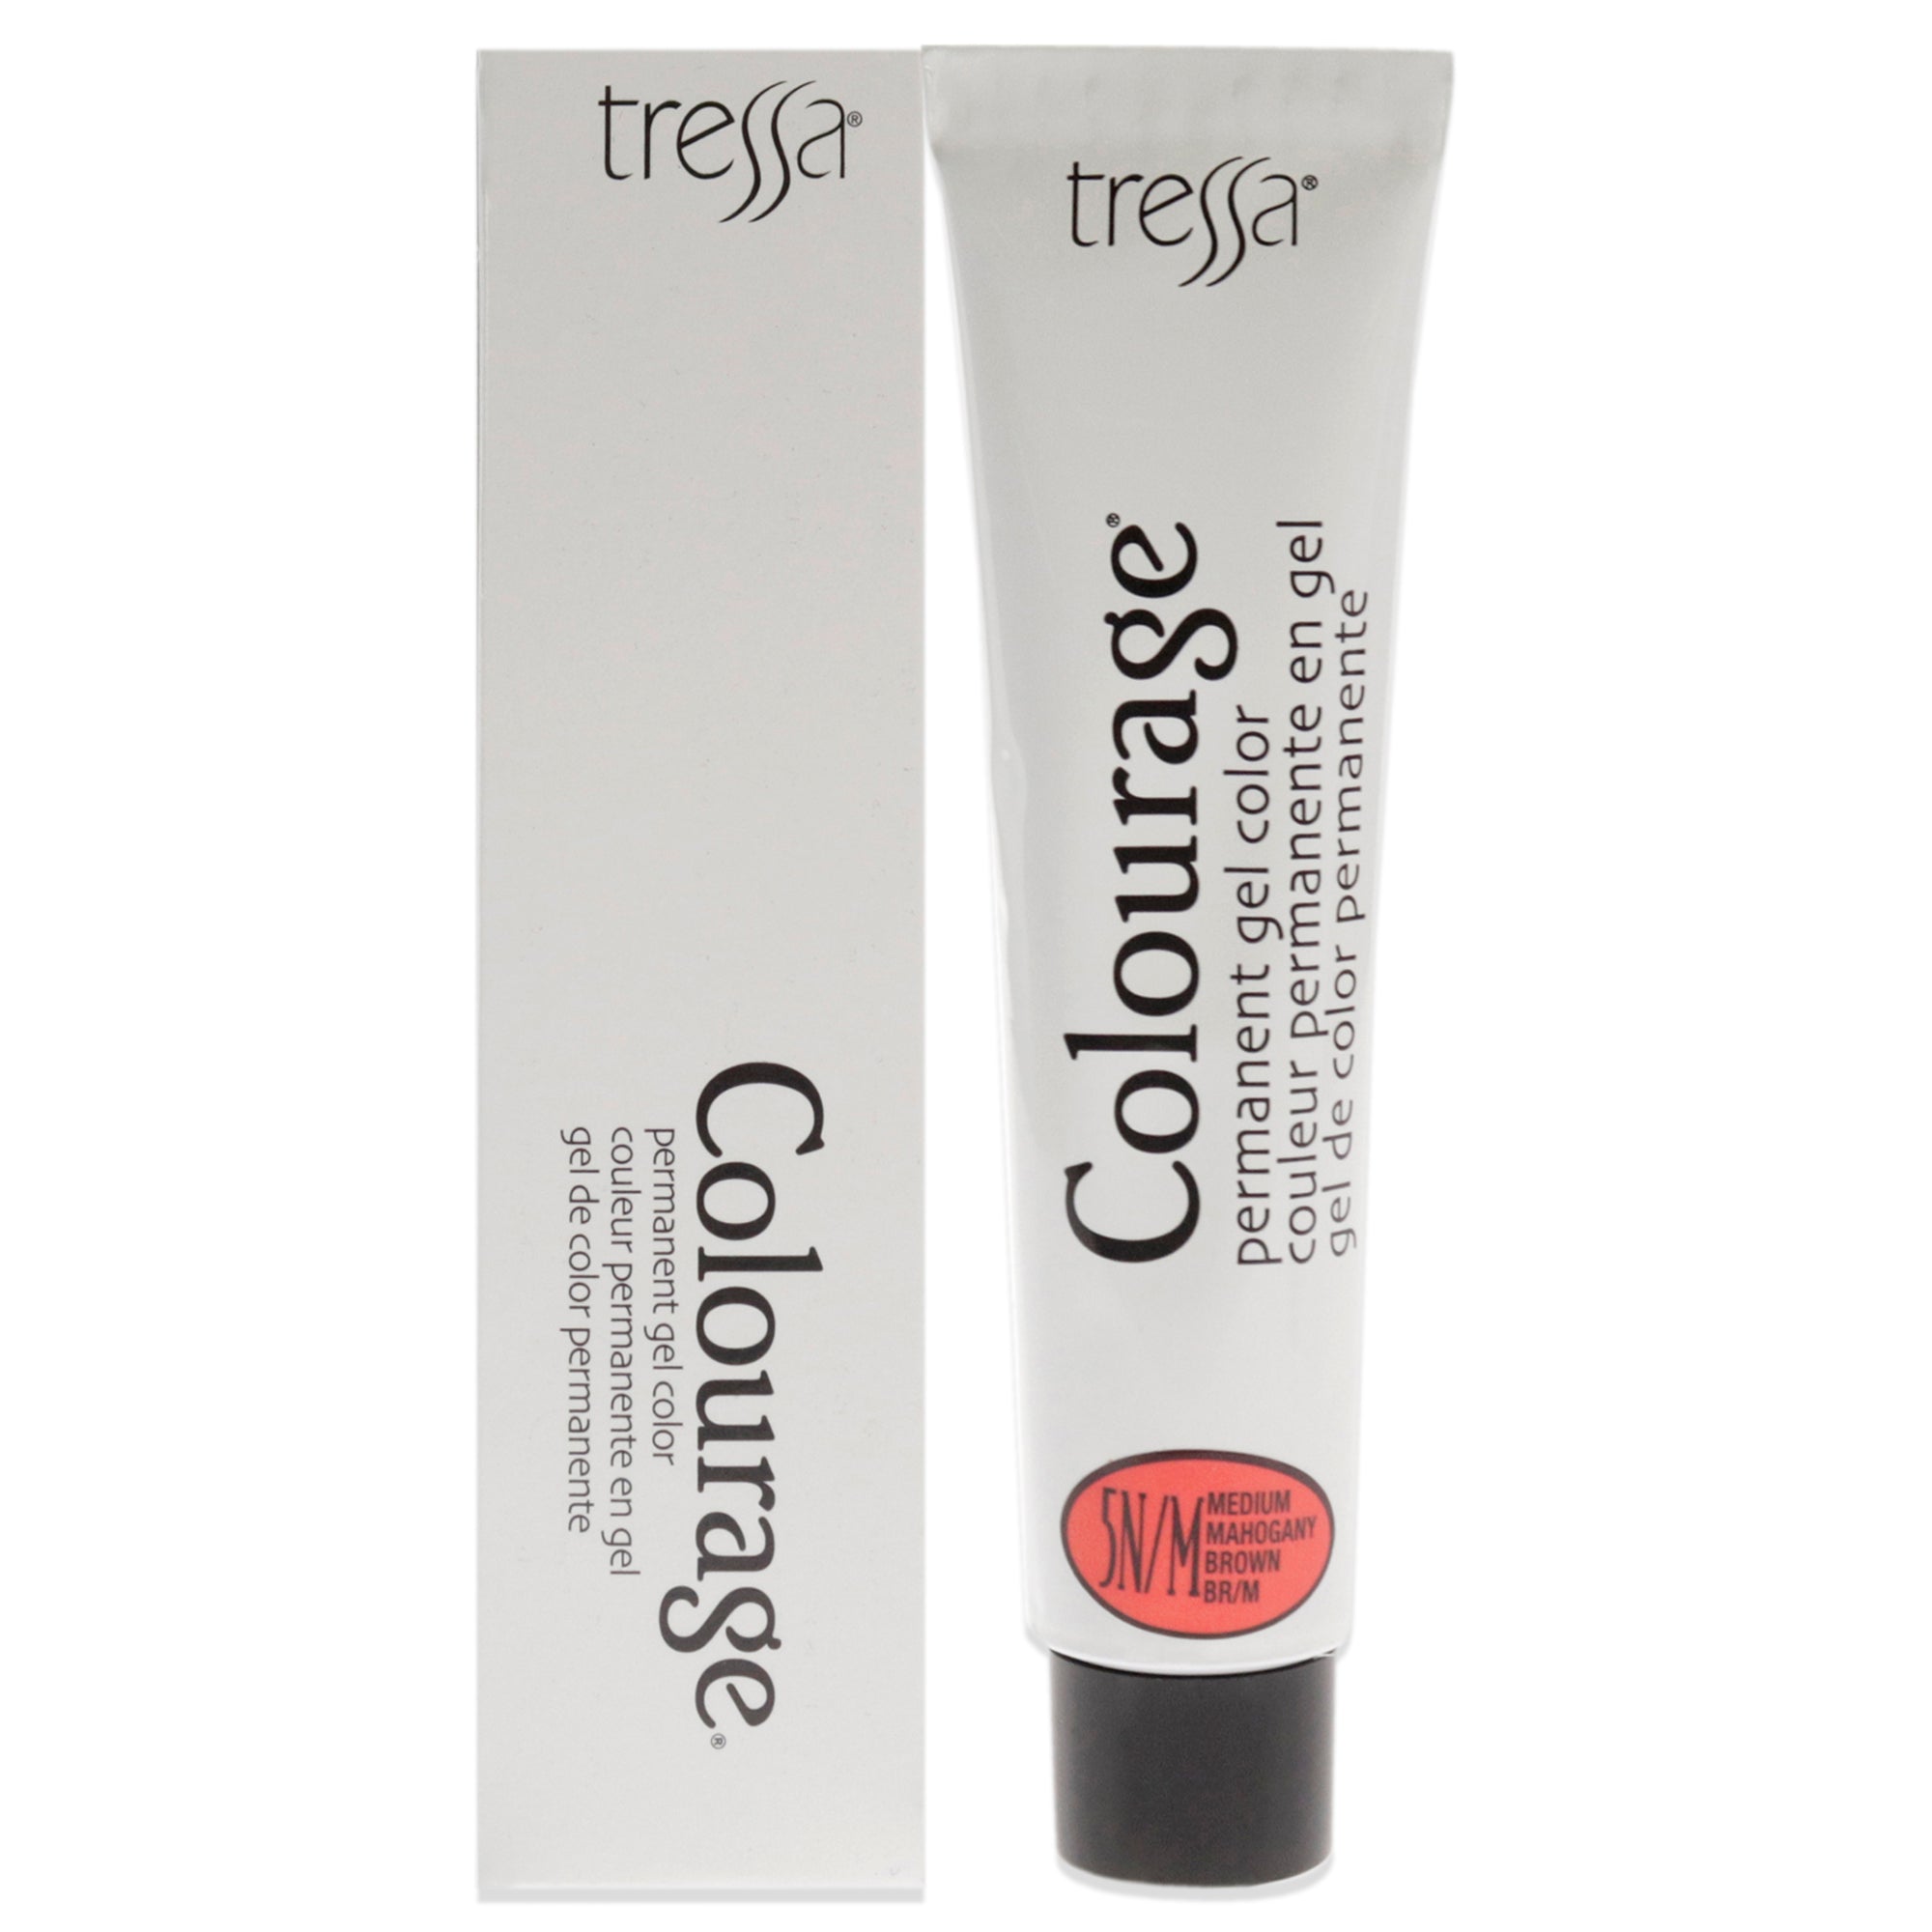 Colourage Permanent Gel Color - 5NM Medium Mahogany Brown by Tressa for Unisex - 2 oz Hair Color